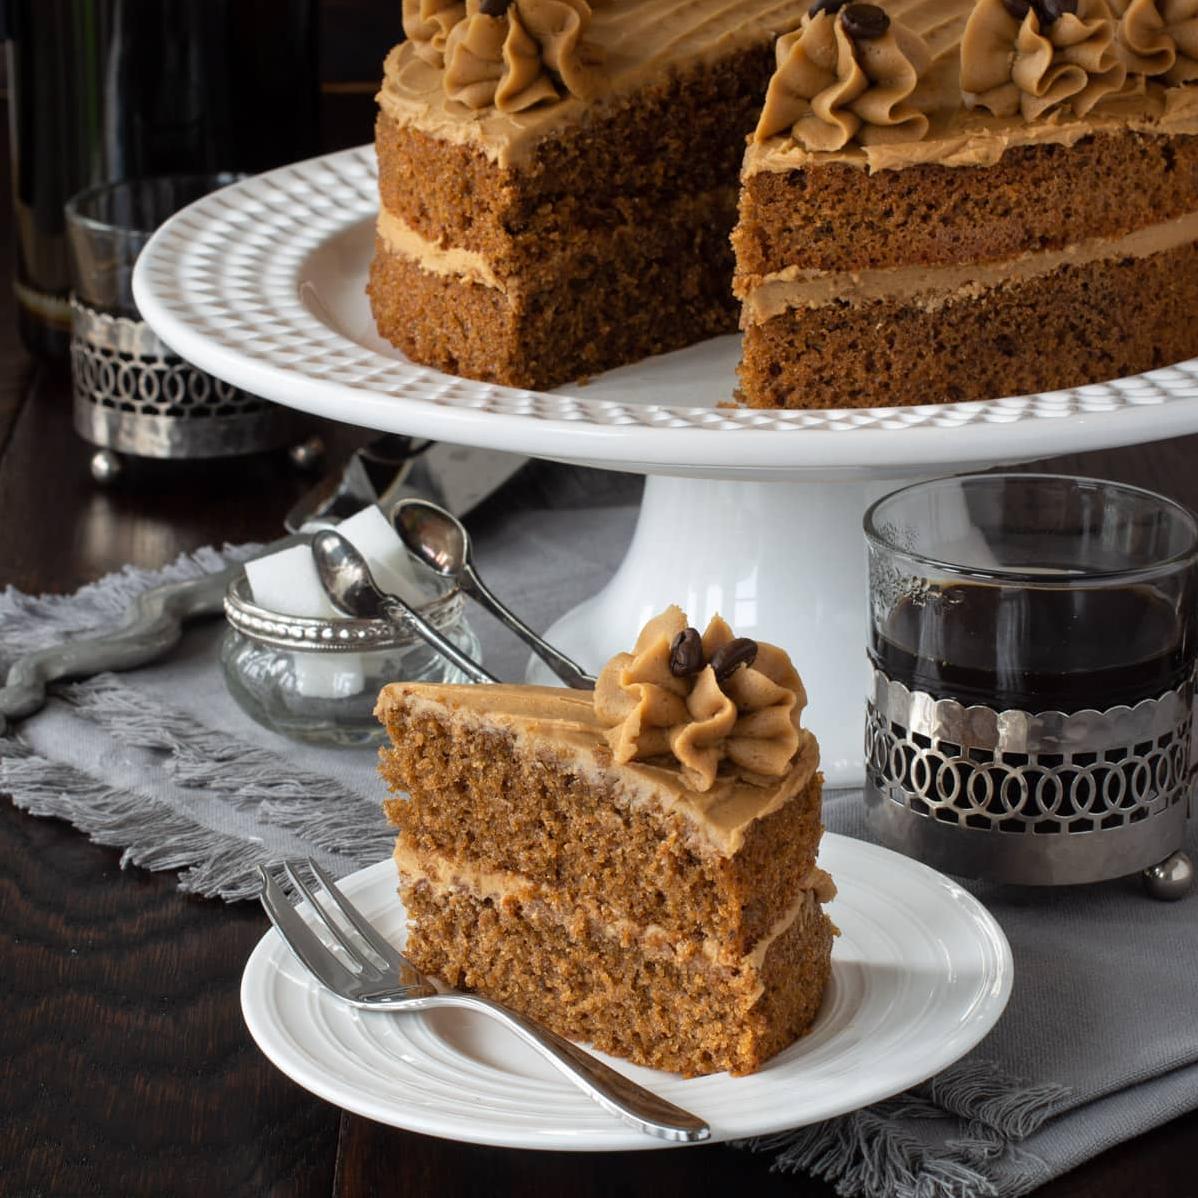  Satisfy your sweet tooth and caffeine fix simultaneously with this delicious Coffee Layer Cake!